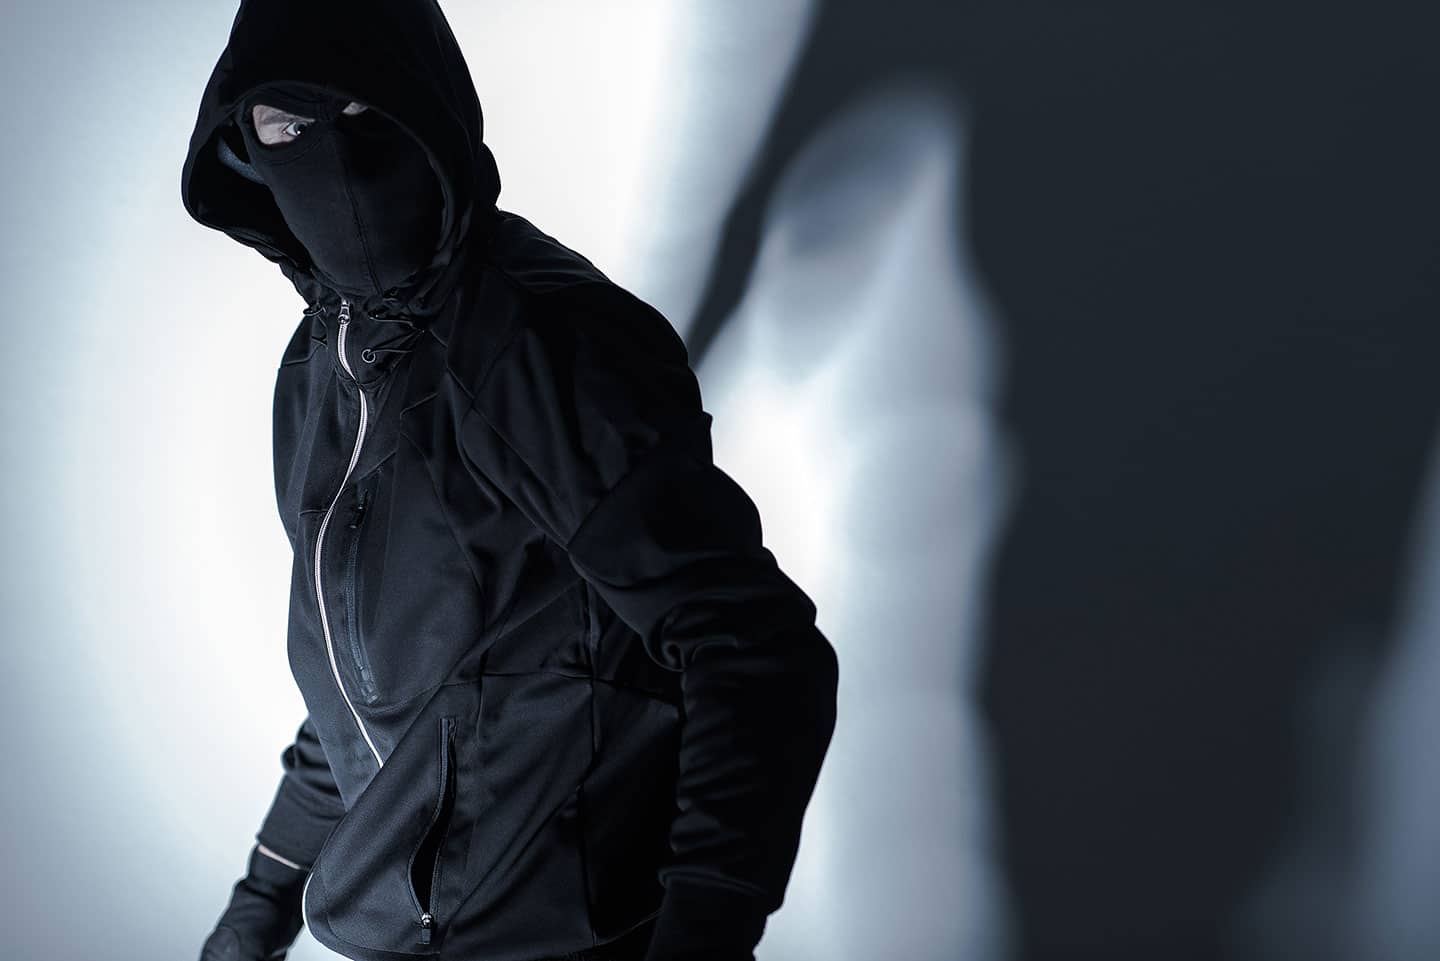 Robber in Black Mask and Clothes | Murder Defense Lawyers in Los Angeles​​ | Wegman & Levin